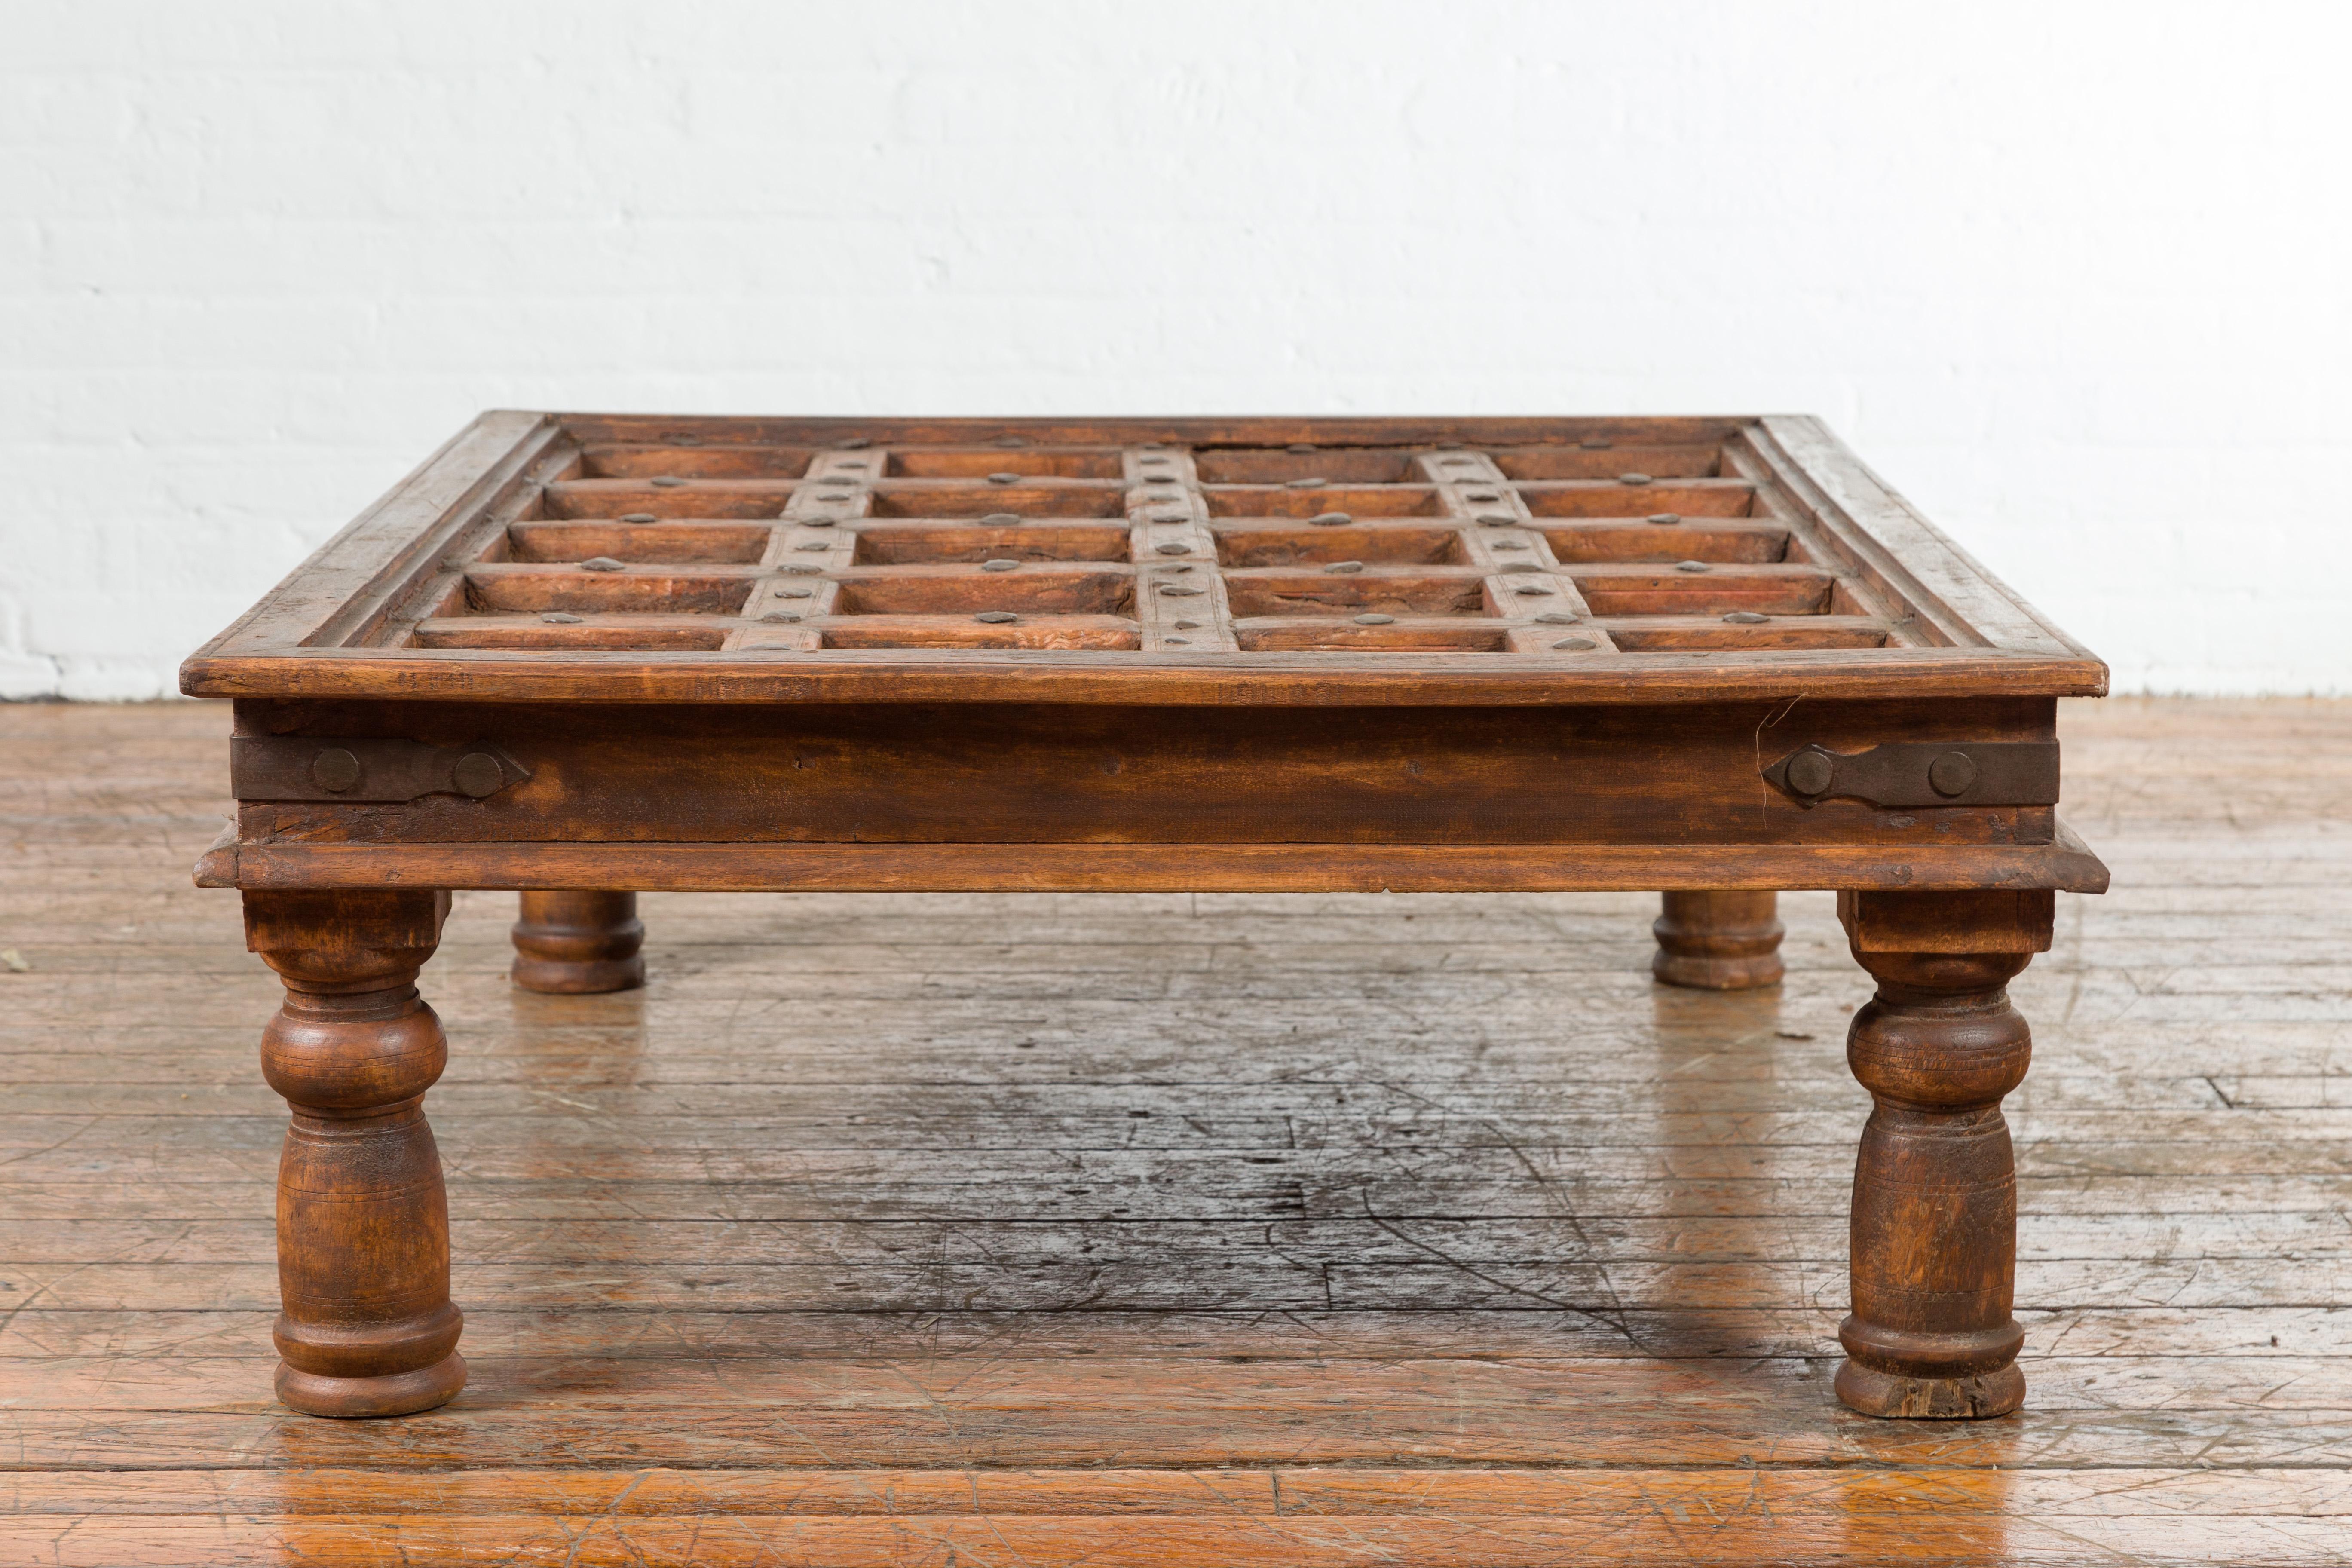 Indian 19th Century Paneled Door with Iron Accents Turned into a Coffee Table 7